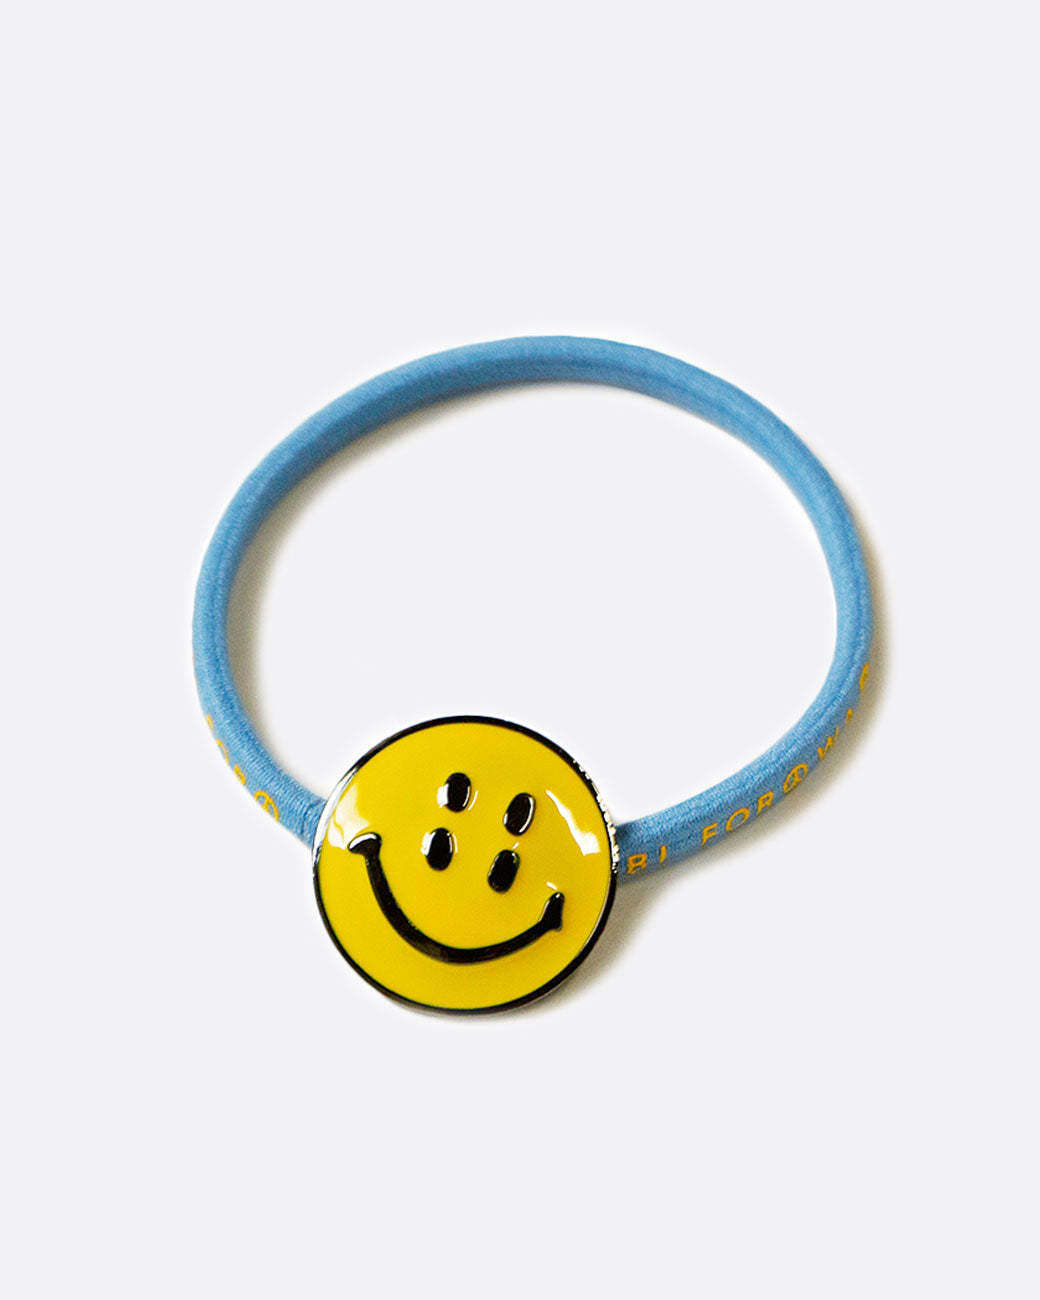 Kapital smiley hair tie in light blue, shown from above.